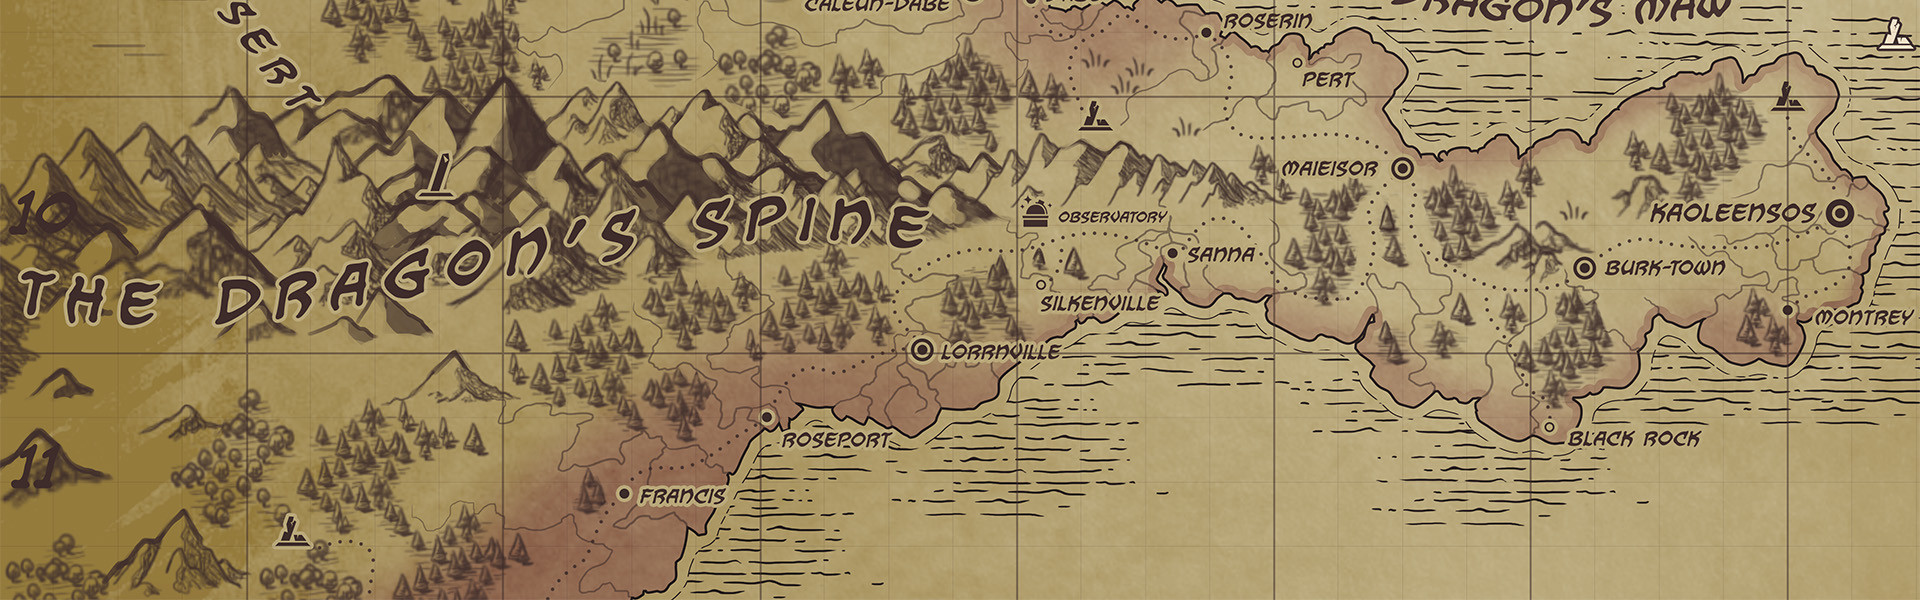 The Dragon's Spine is a region south of the Cross featuring a dangerous and an untraversed mountain region.